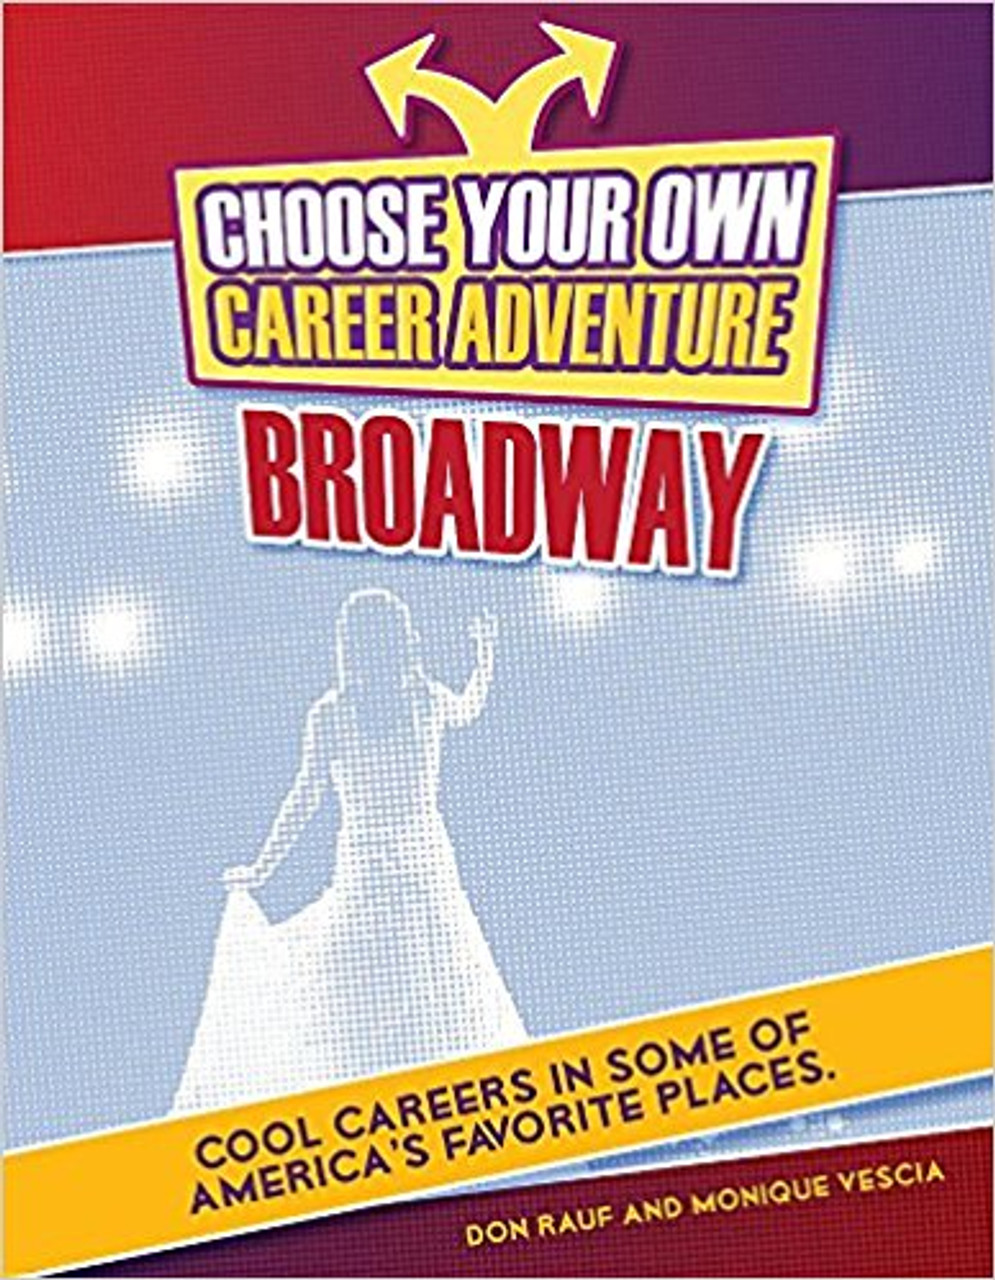 Choose Your Own Career Adventure on Broadway by Monique Vescia